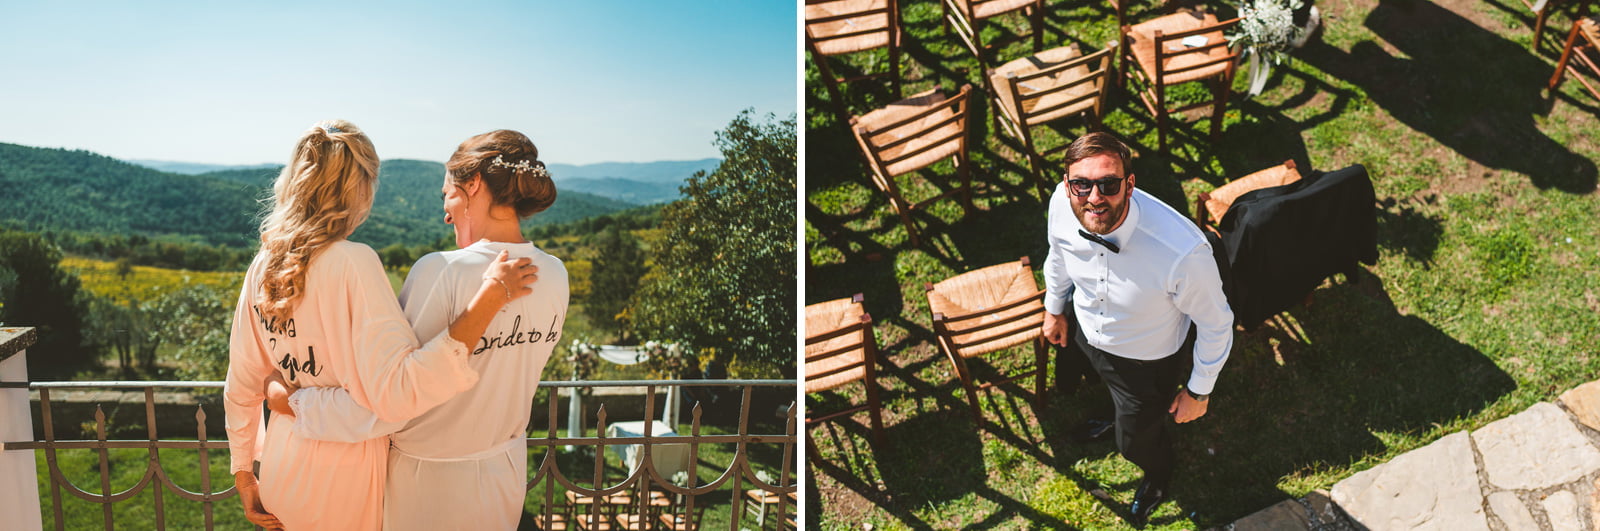 , F+P Wedding at Montelucci Country Resort by Federico Pannacci, Federico Pannacci